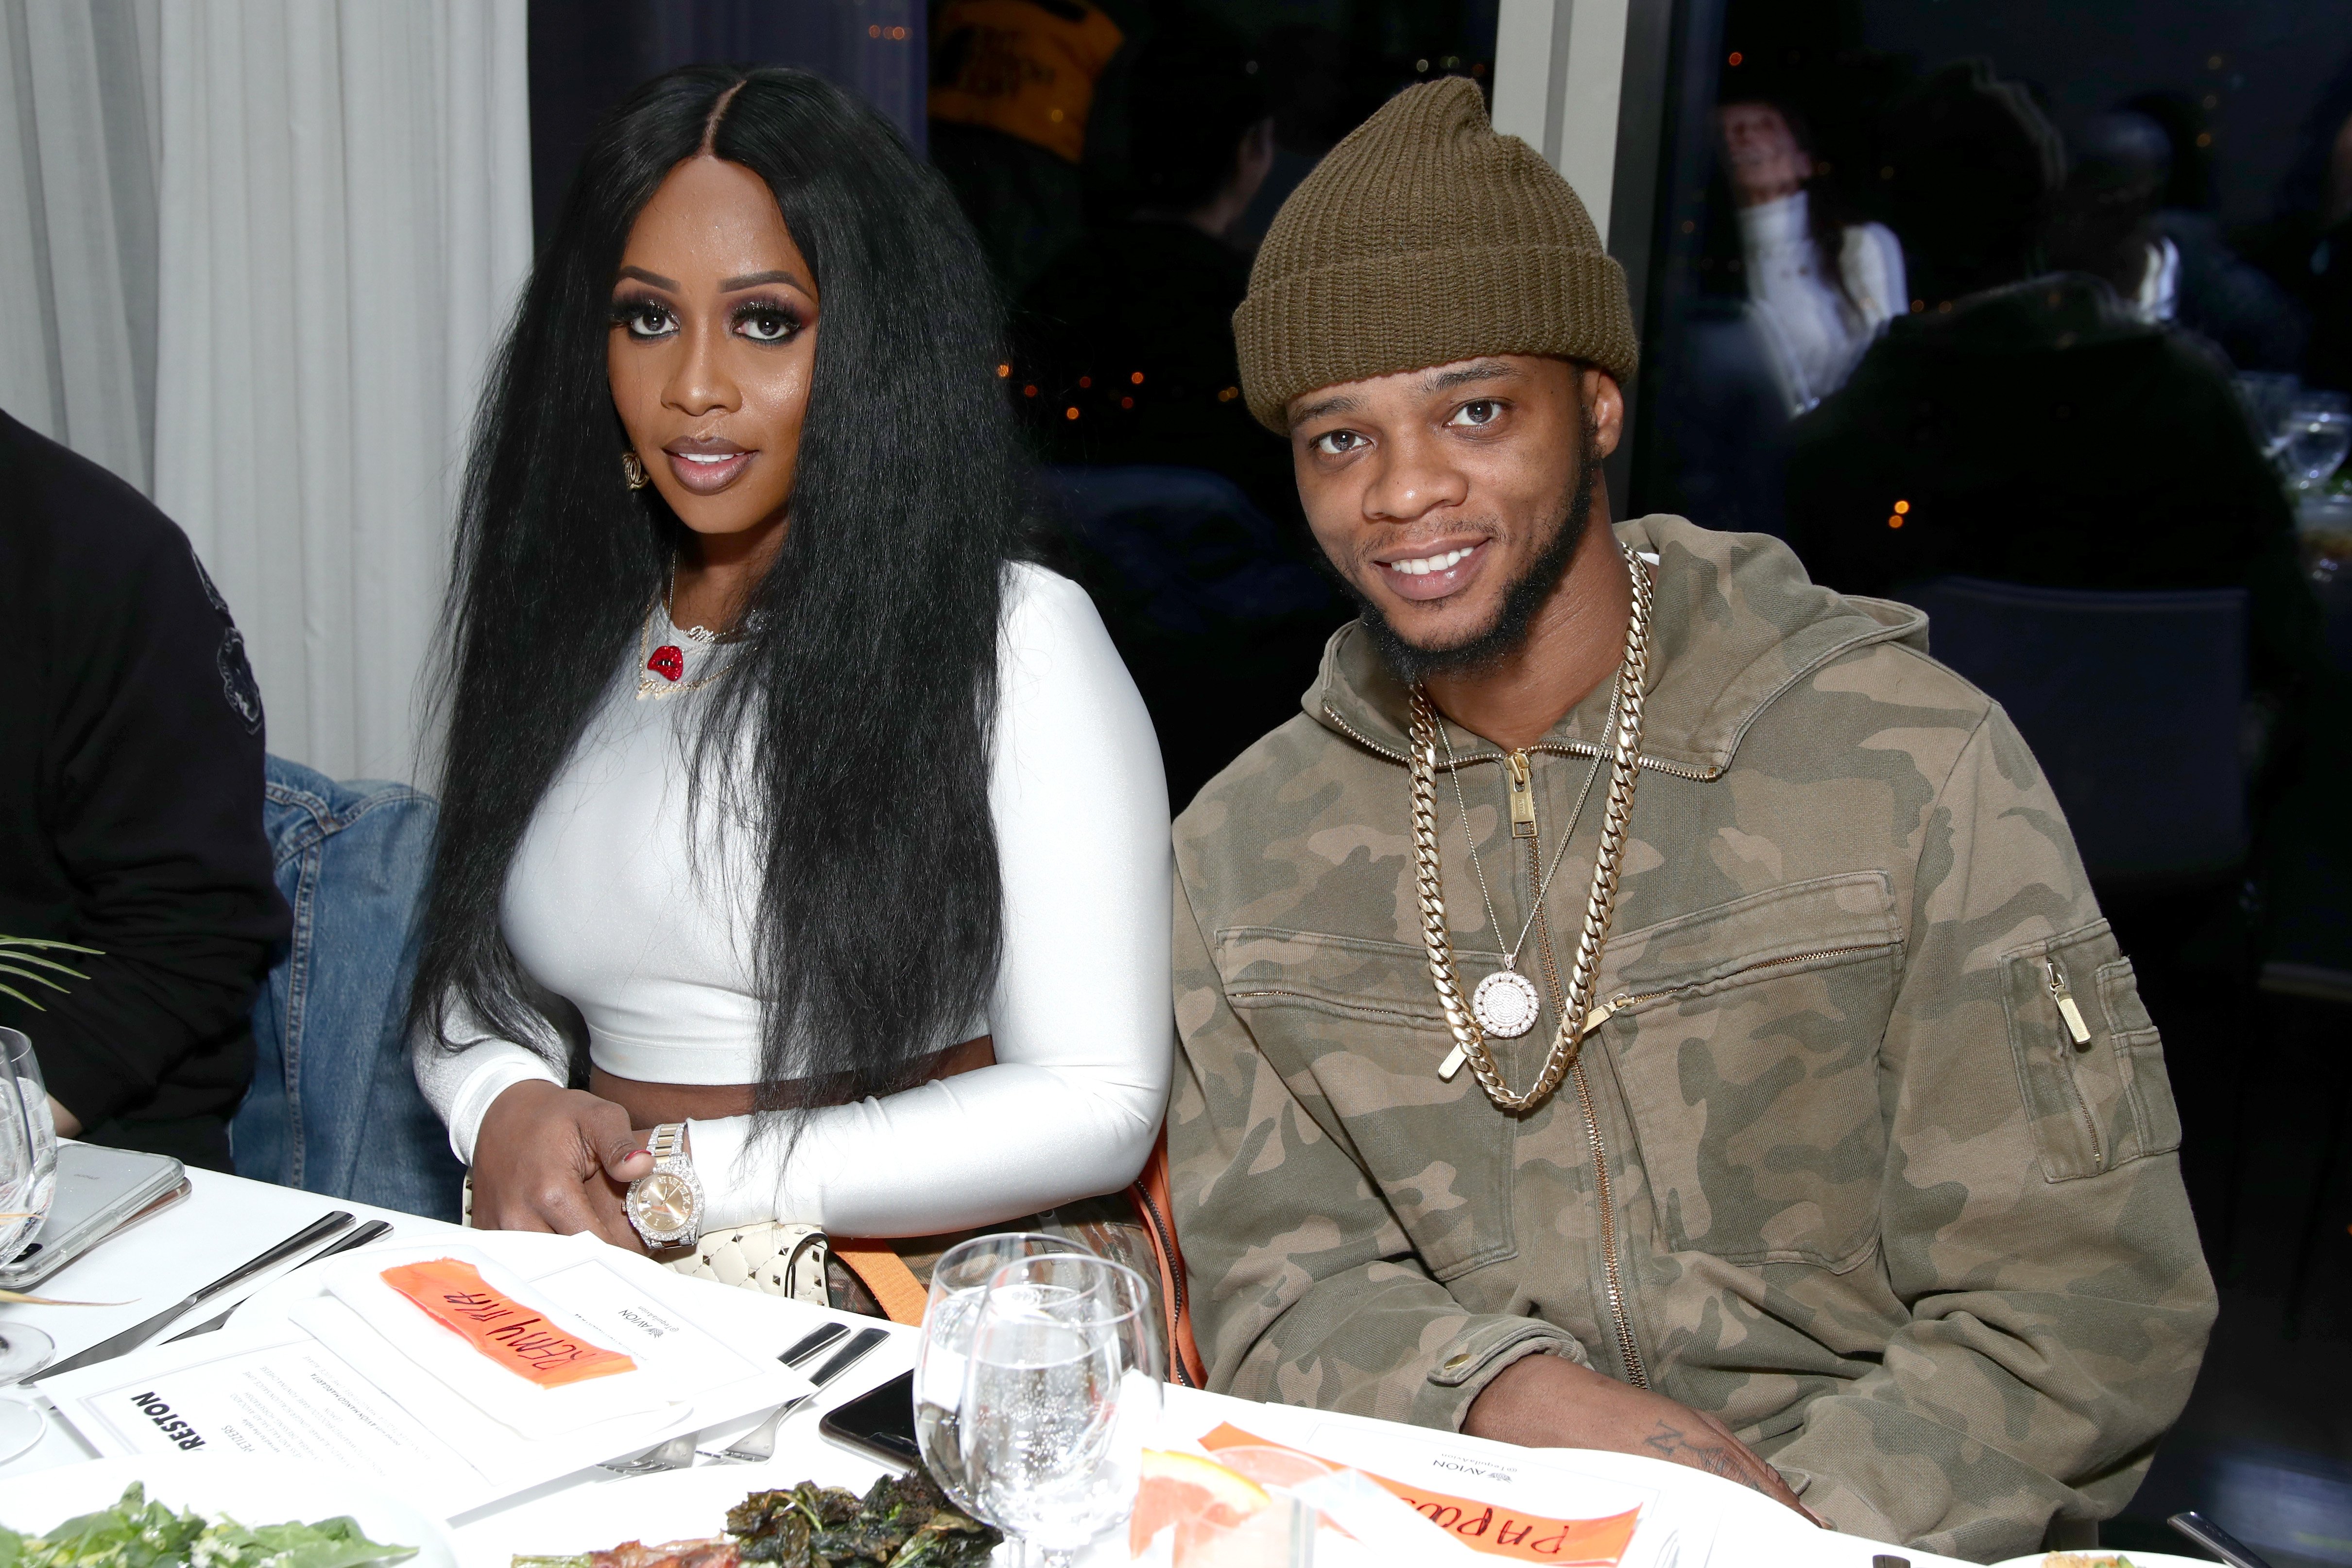 Remy Ma and Papoose Mackie attend the Heron Preston + Tequila Avion Dance Party on February 13, 2018 in New York City. | Source: Cindy Ord/Getty Images